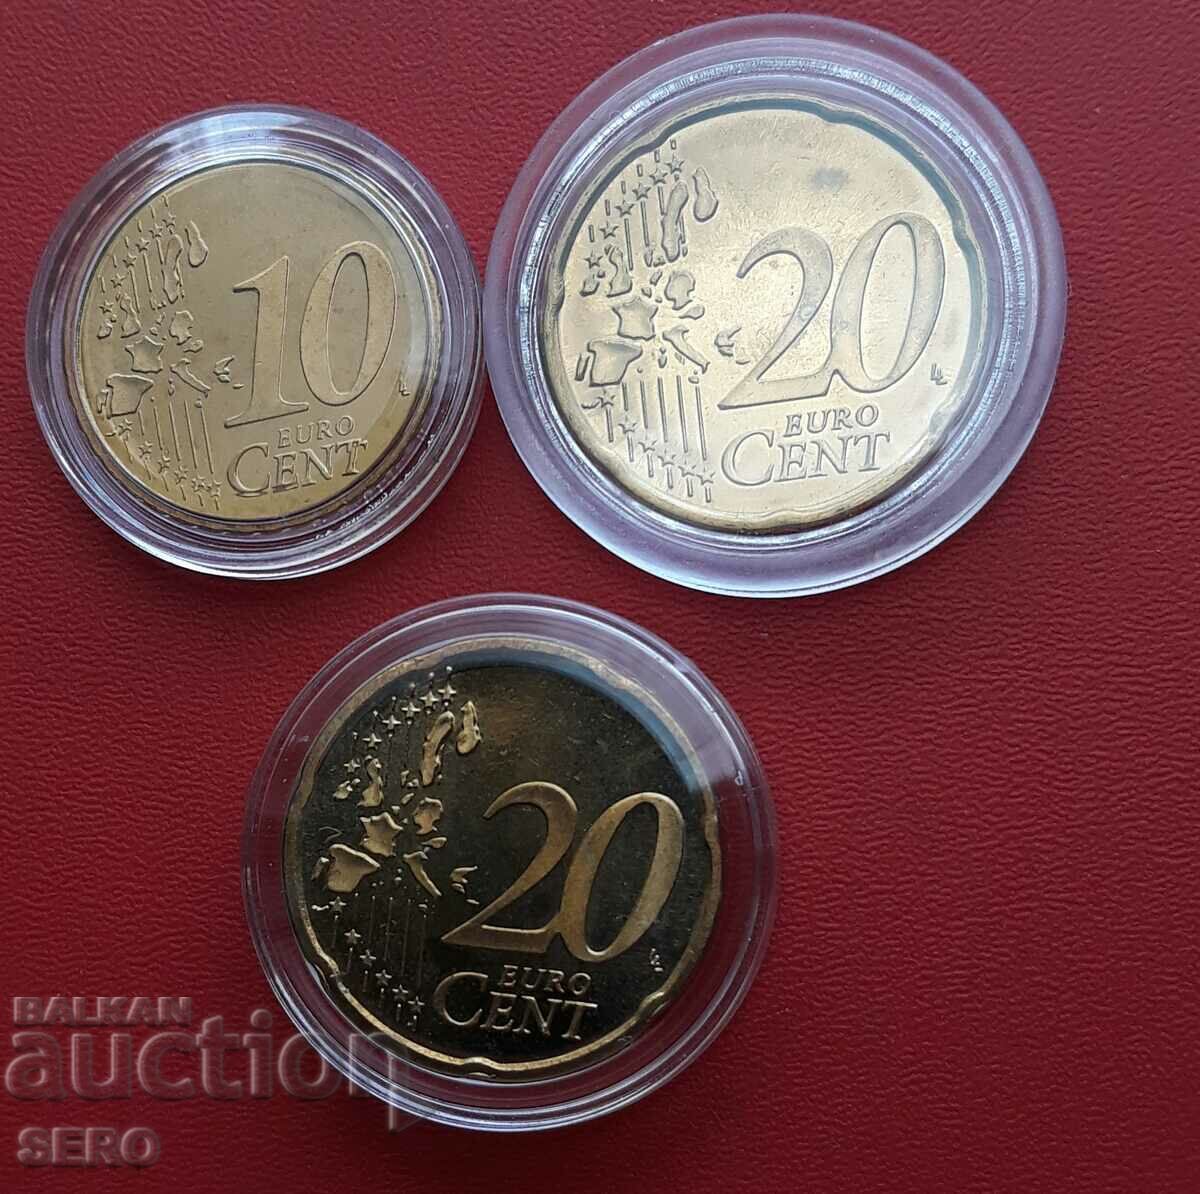 Mixed lot of 3 euro coins - Luxembourg and Finland